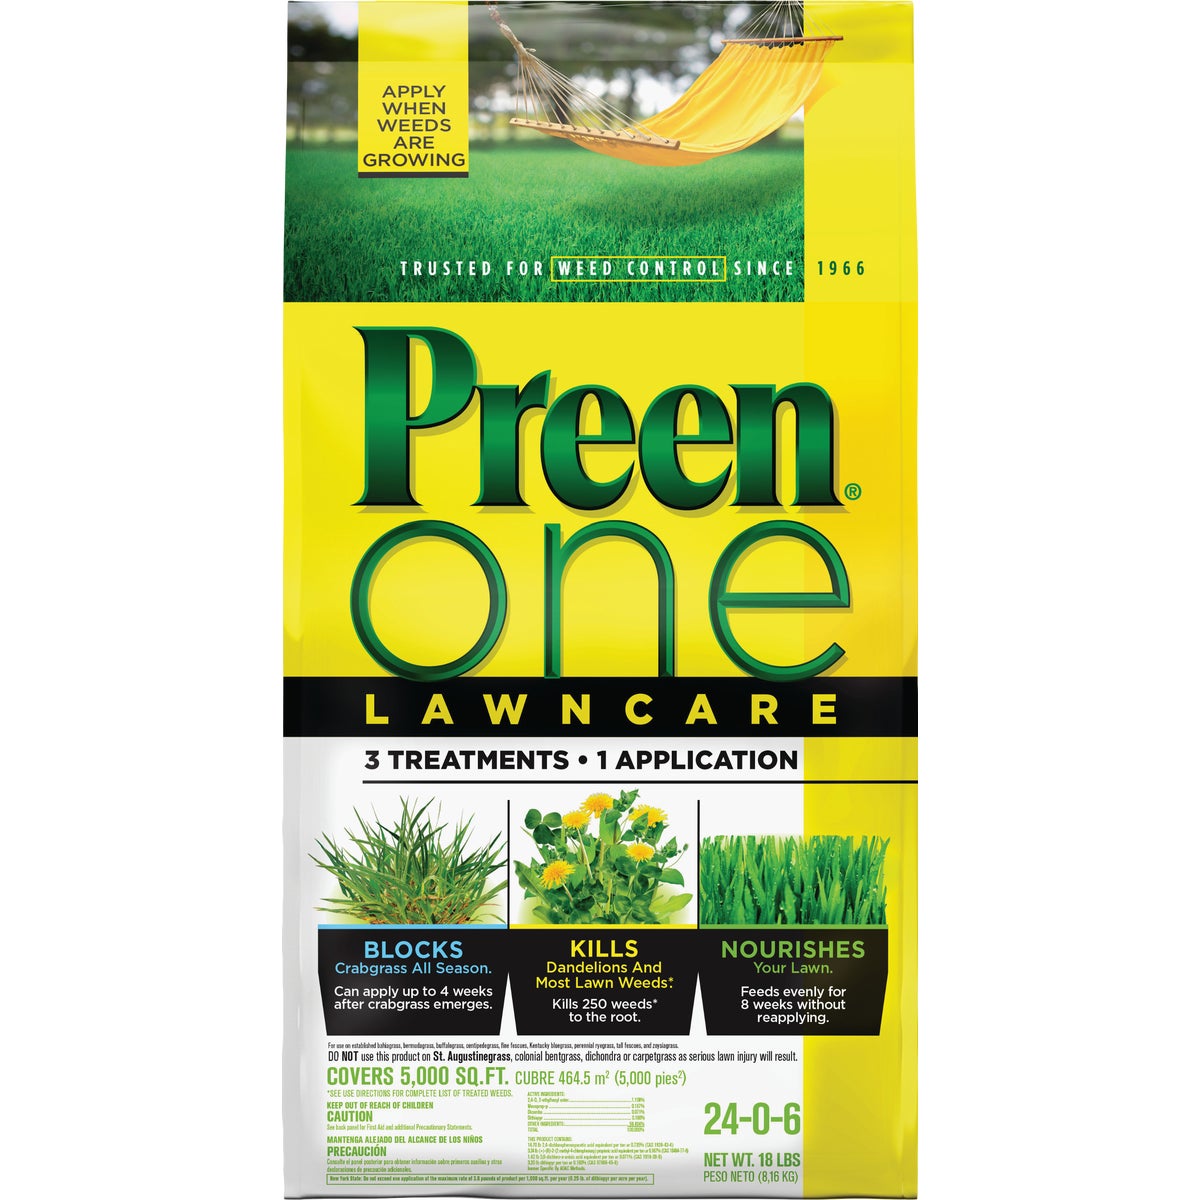 Item 705753, Weed killer with fertilizer provides all you need for weed control in lawns